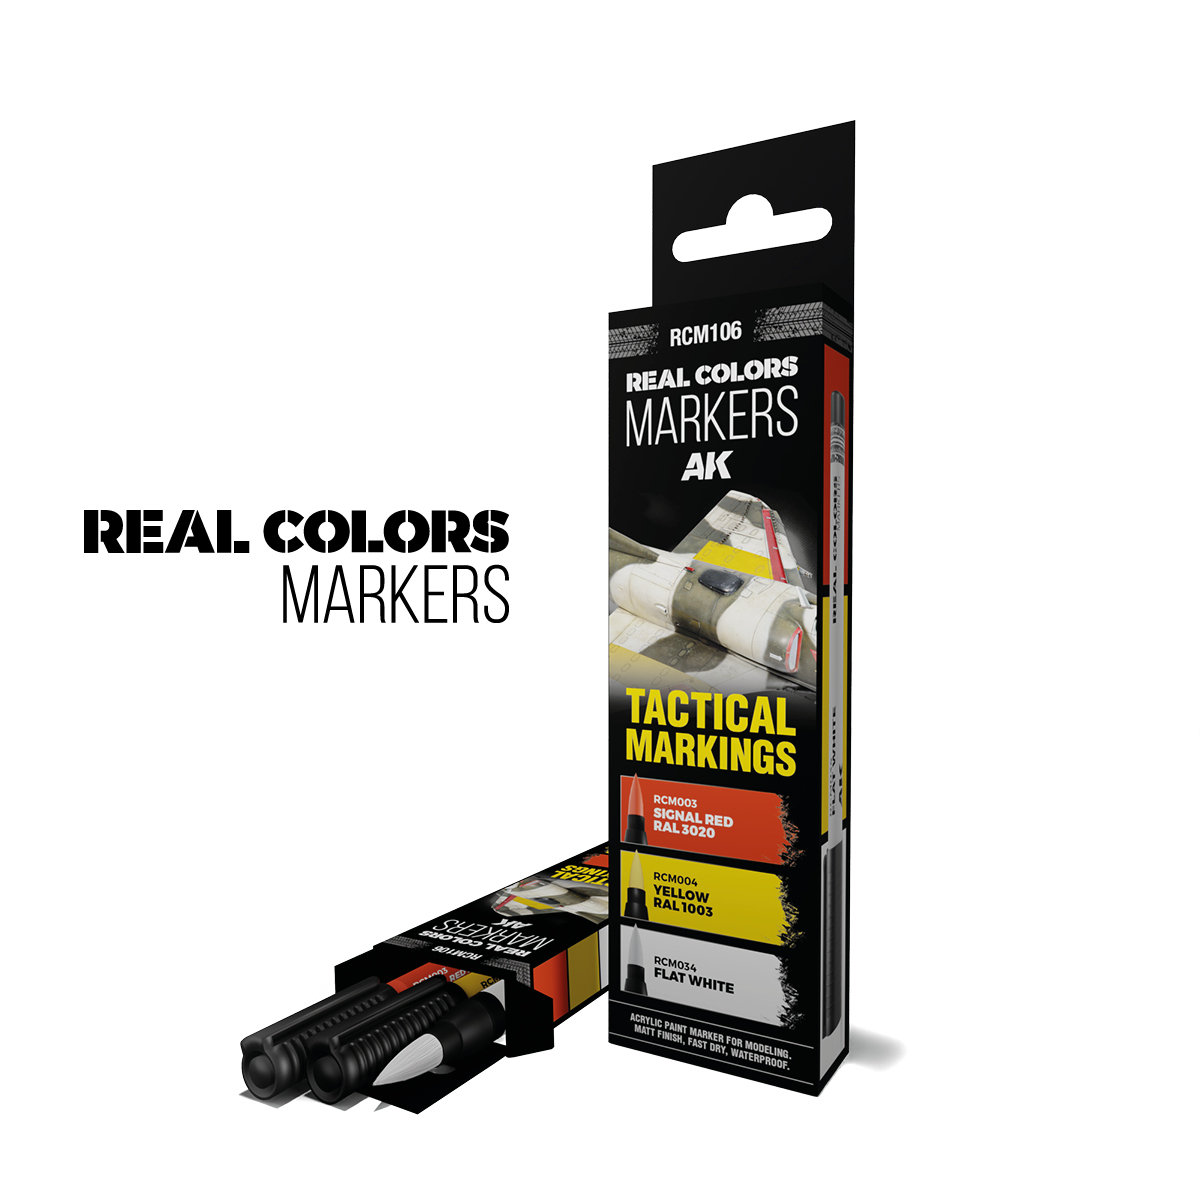 Real Colors Acrylic Paint Marker Tactical Markings Set (3)